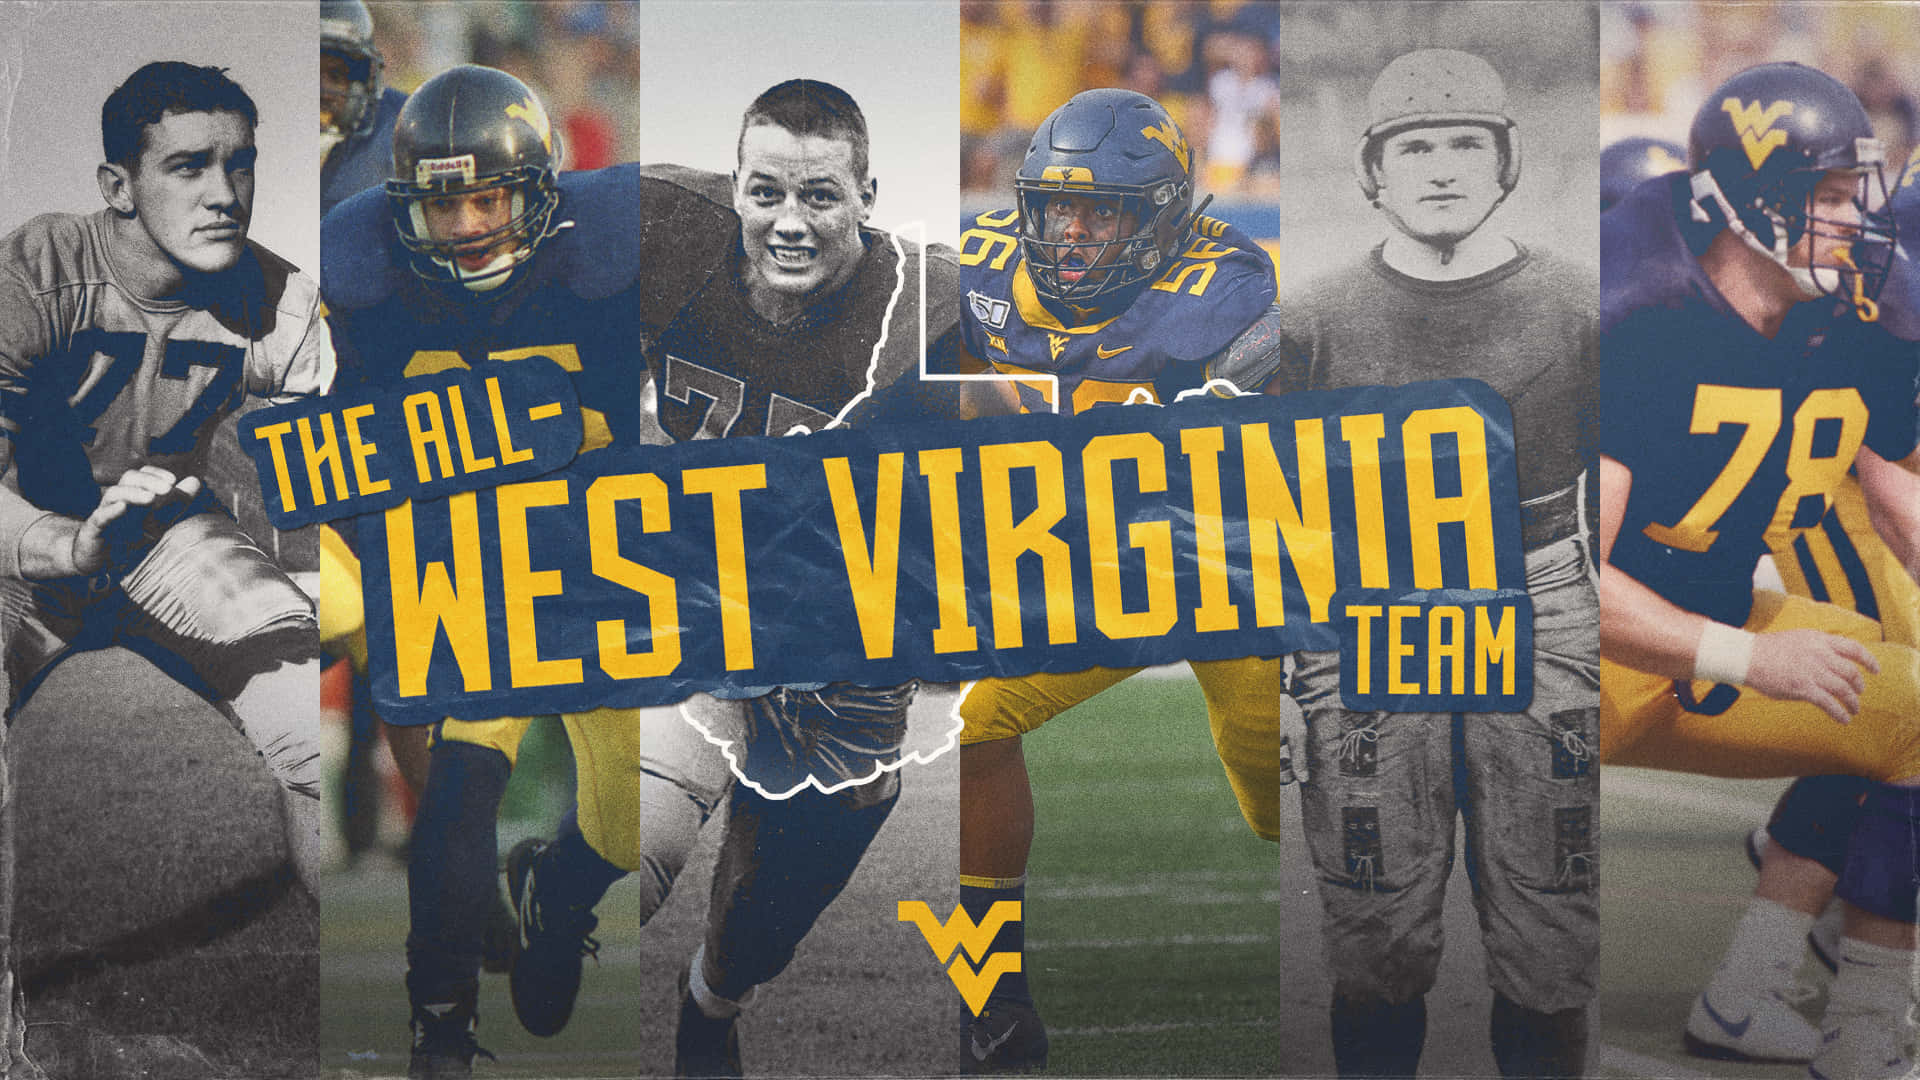 The All West Virginia Team Background